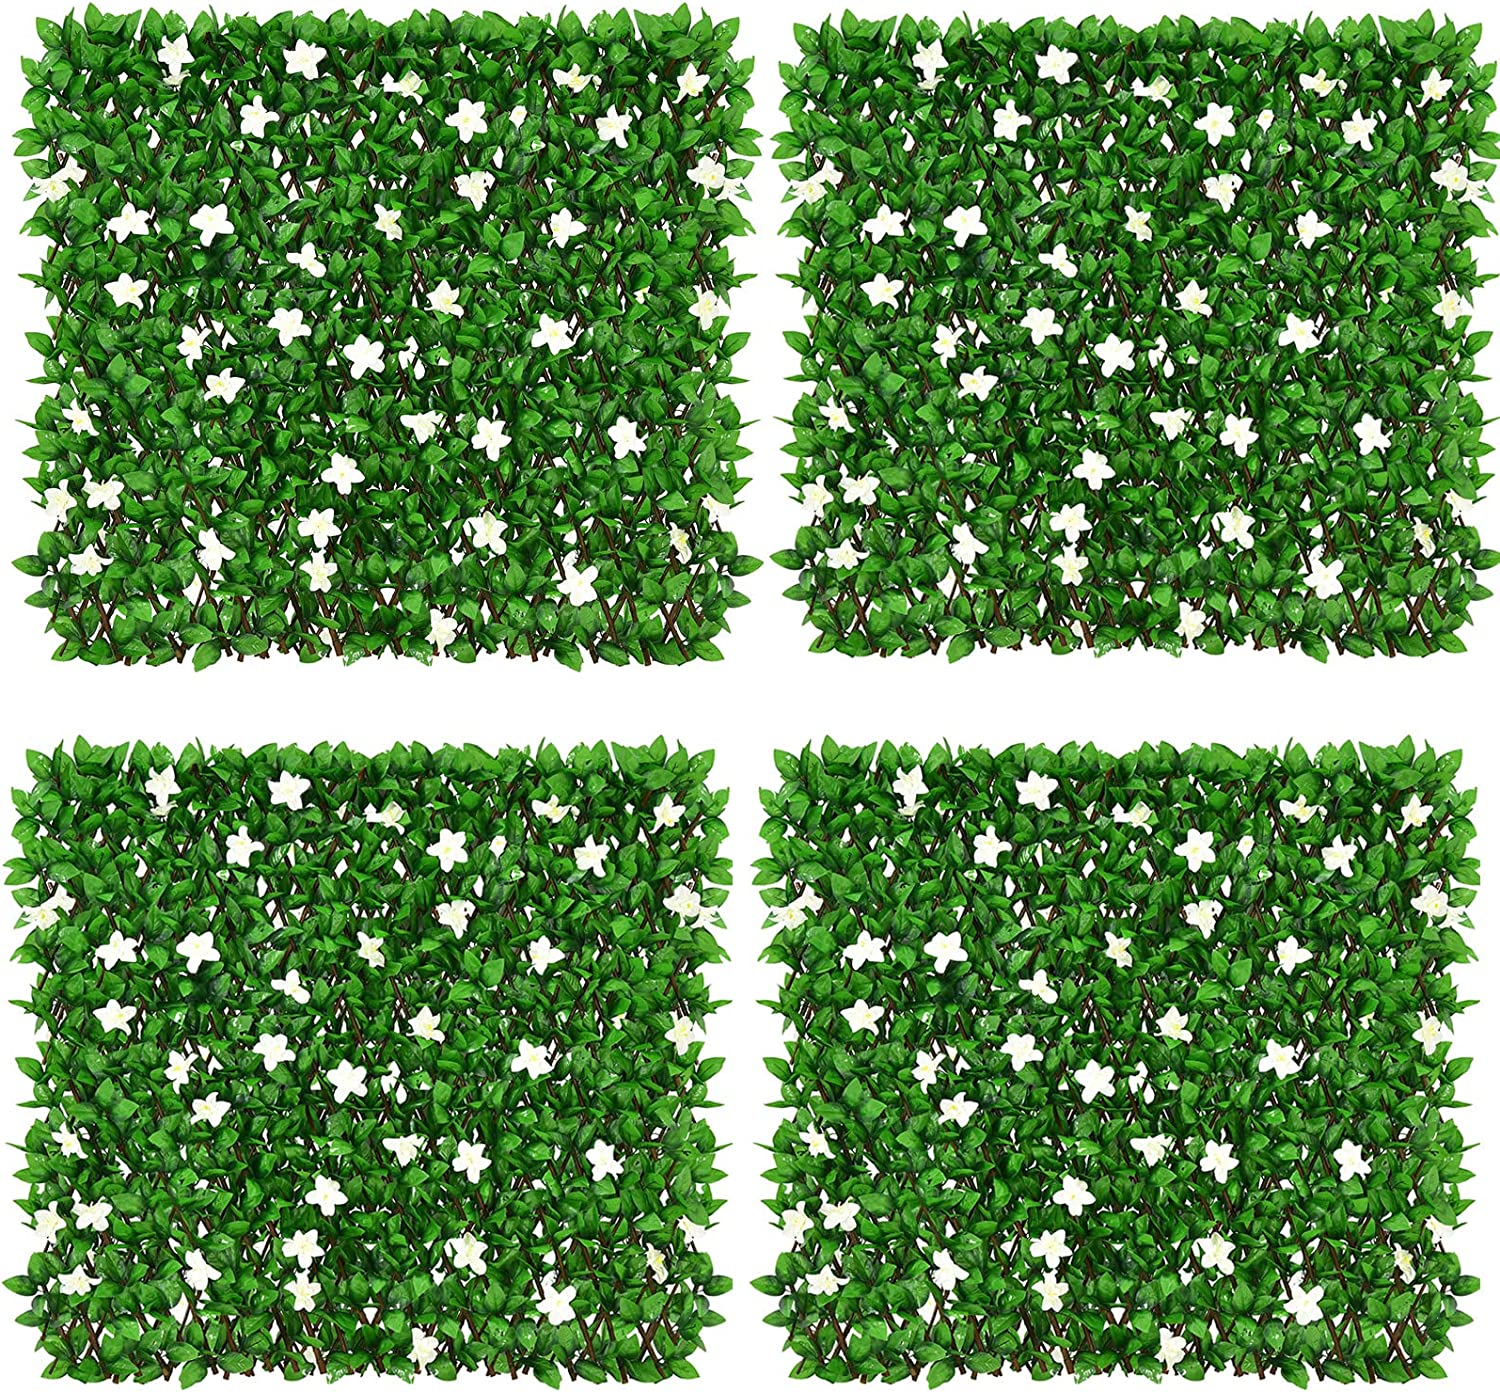 Expandable Fence with Leaves, 6.5ft Privacy Screen Decorative Fake Ivy Fencing Panel